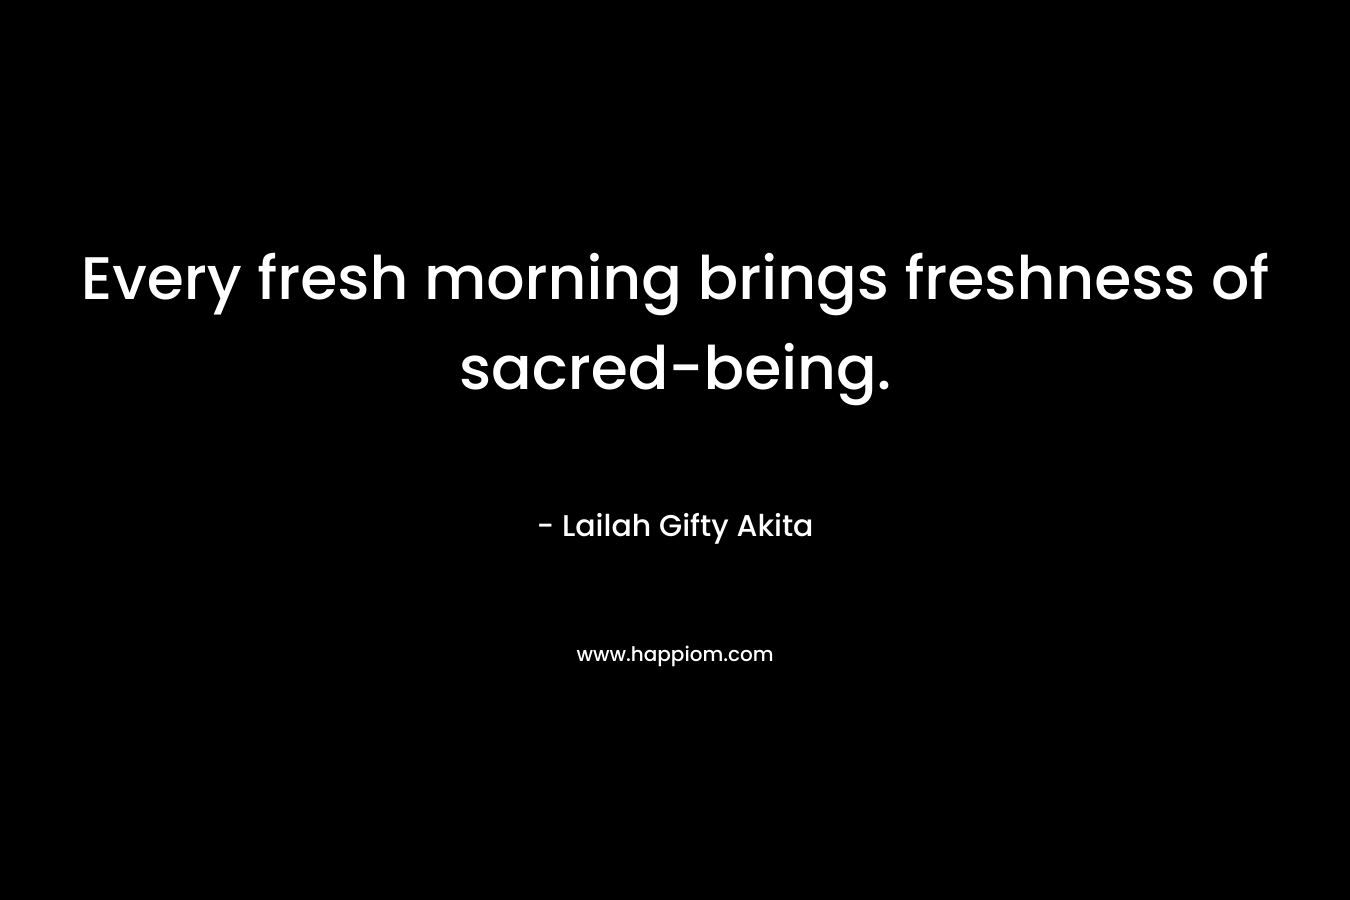 Every fresh morning brings freshness of sacred-being. – Lailah Gifty Akita